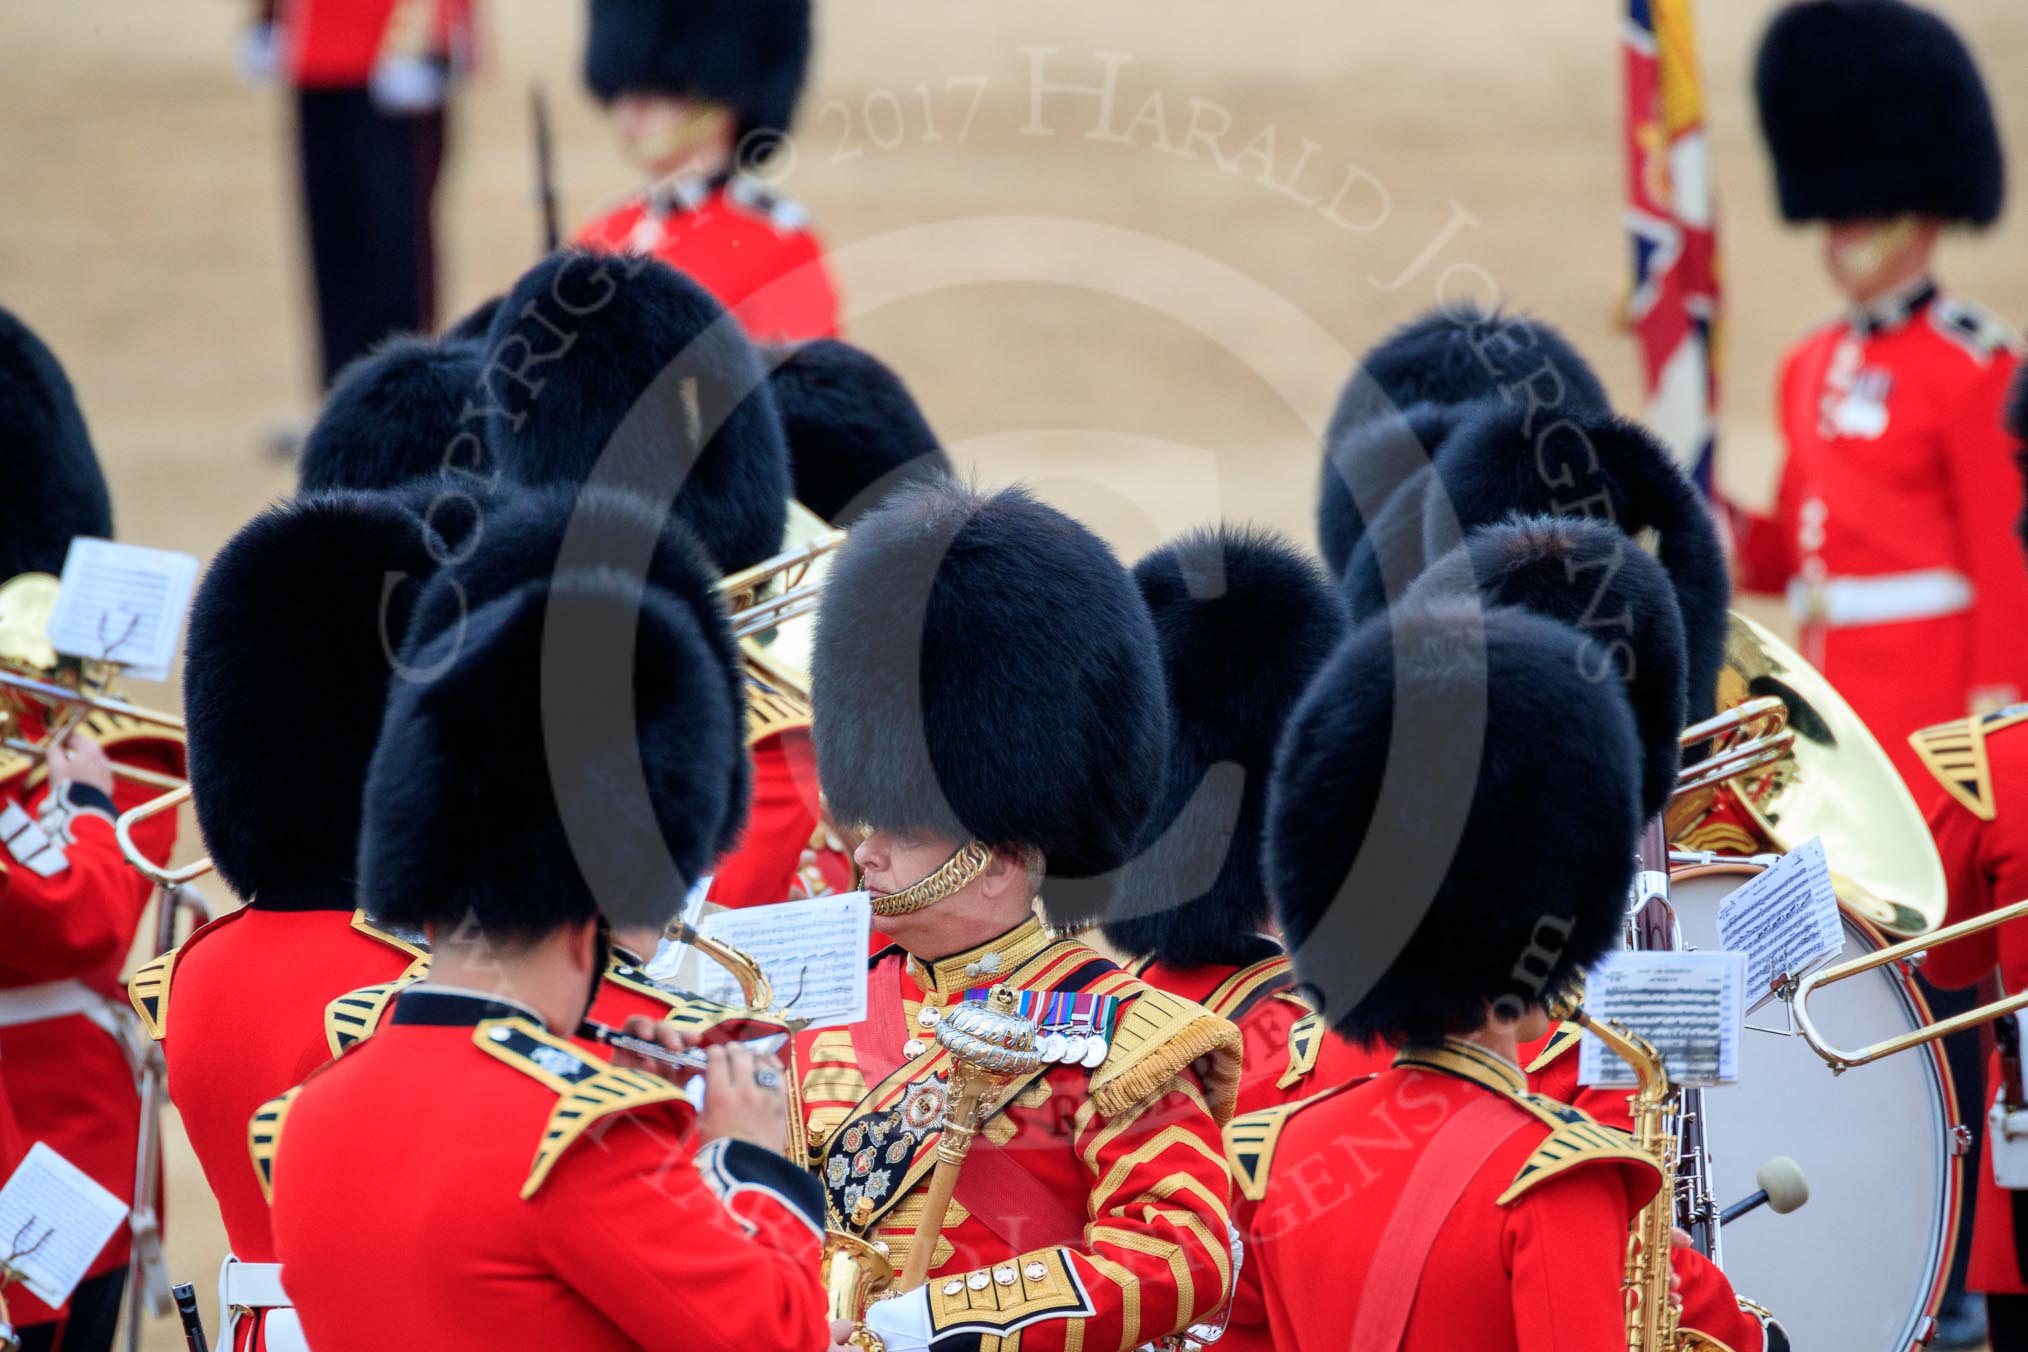 during The Colonel's Review {iptcyear4} (final rehearsal for Trooping the Colour, The Queen's Birthday Parade)  at Horse Guards Parade, Westminster, London, 2 June 2018, 11:10.